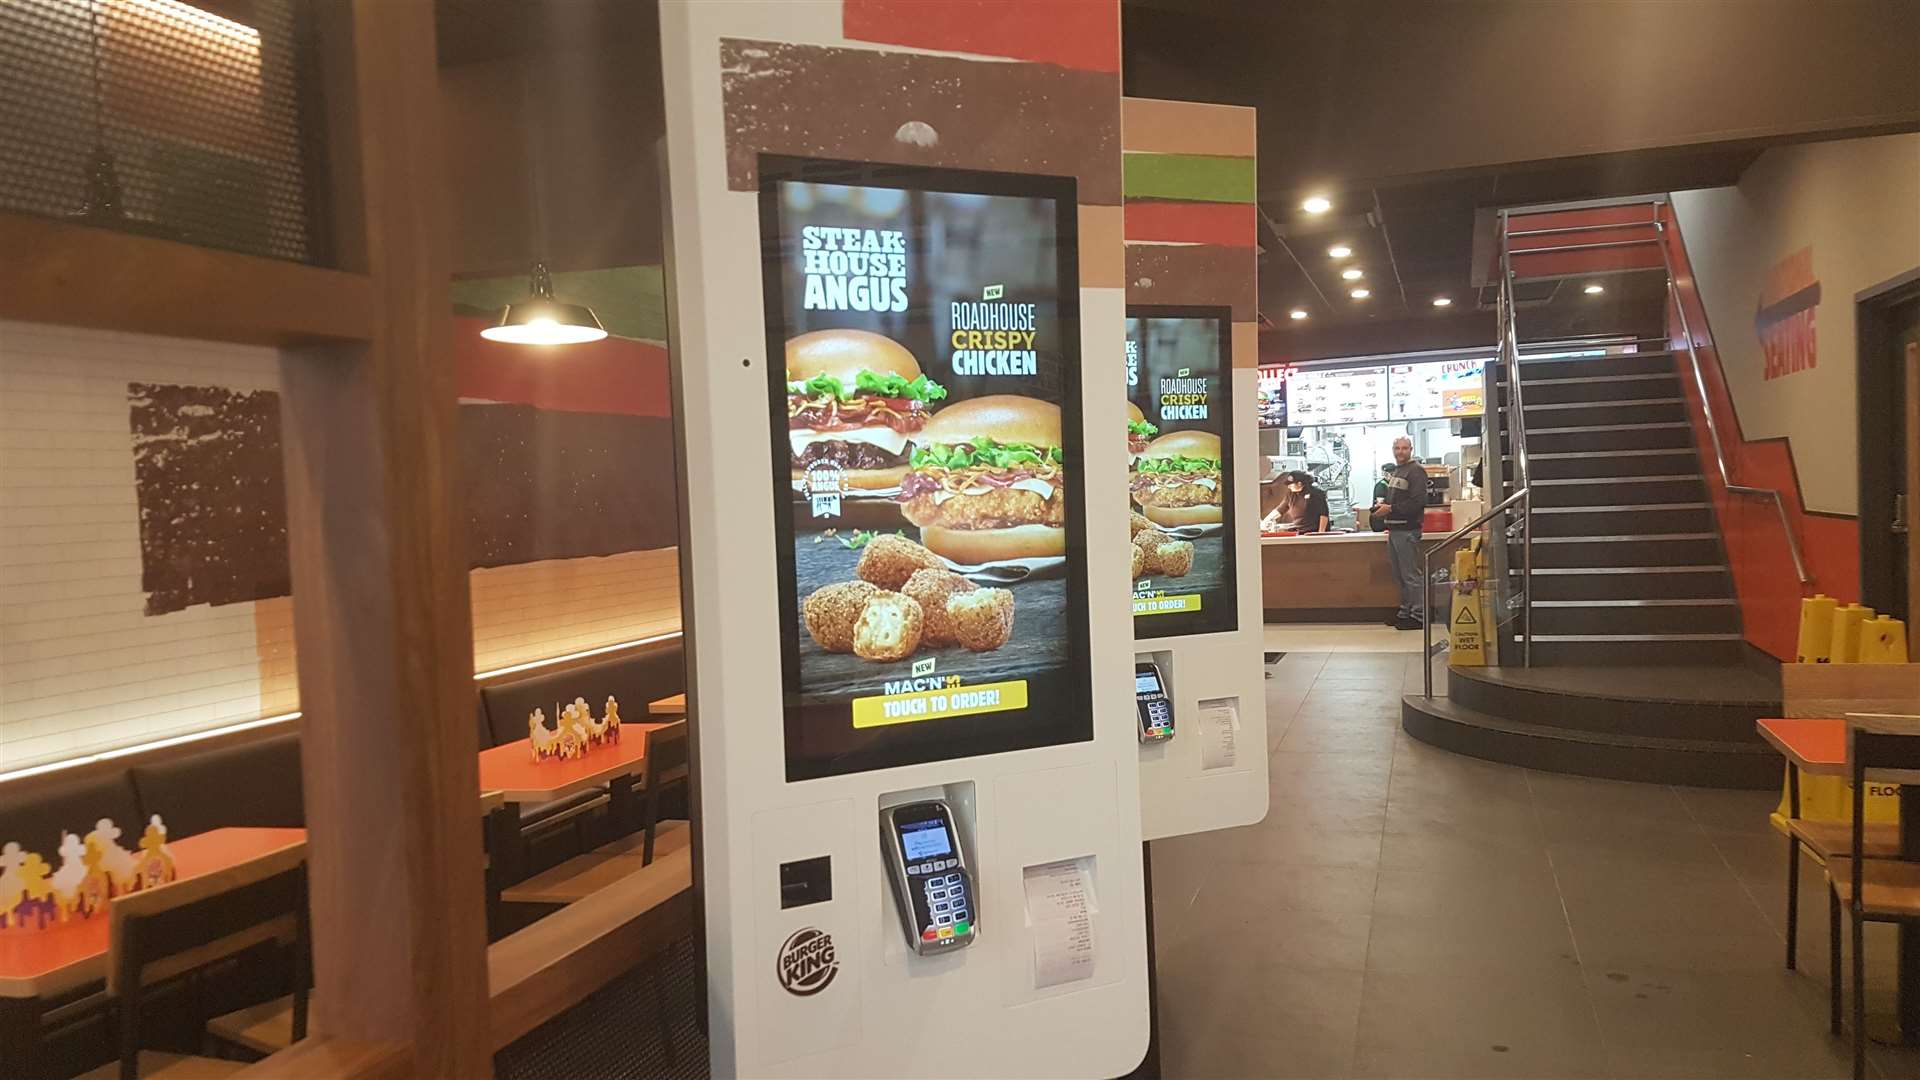 There are now touchscreen ordering machines